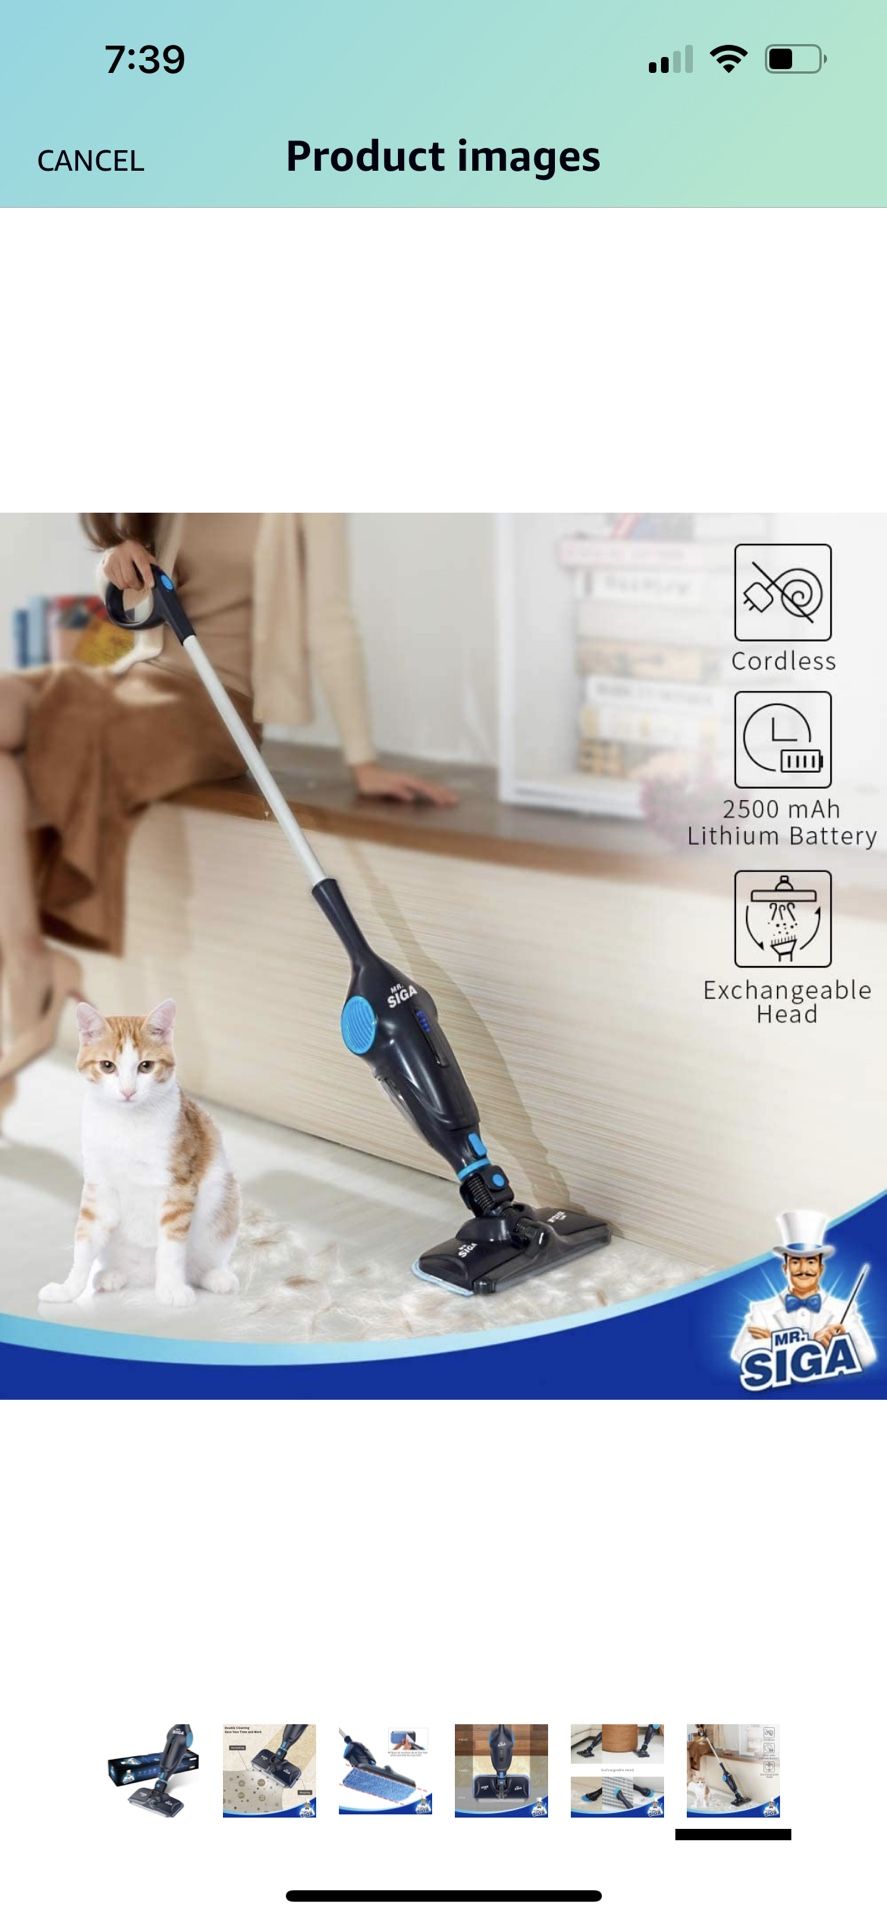 Efficient Cordless Lightweight Vacuum Cleaner Mop for hard floors/tile-Exchangeable head for rugs